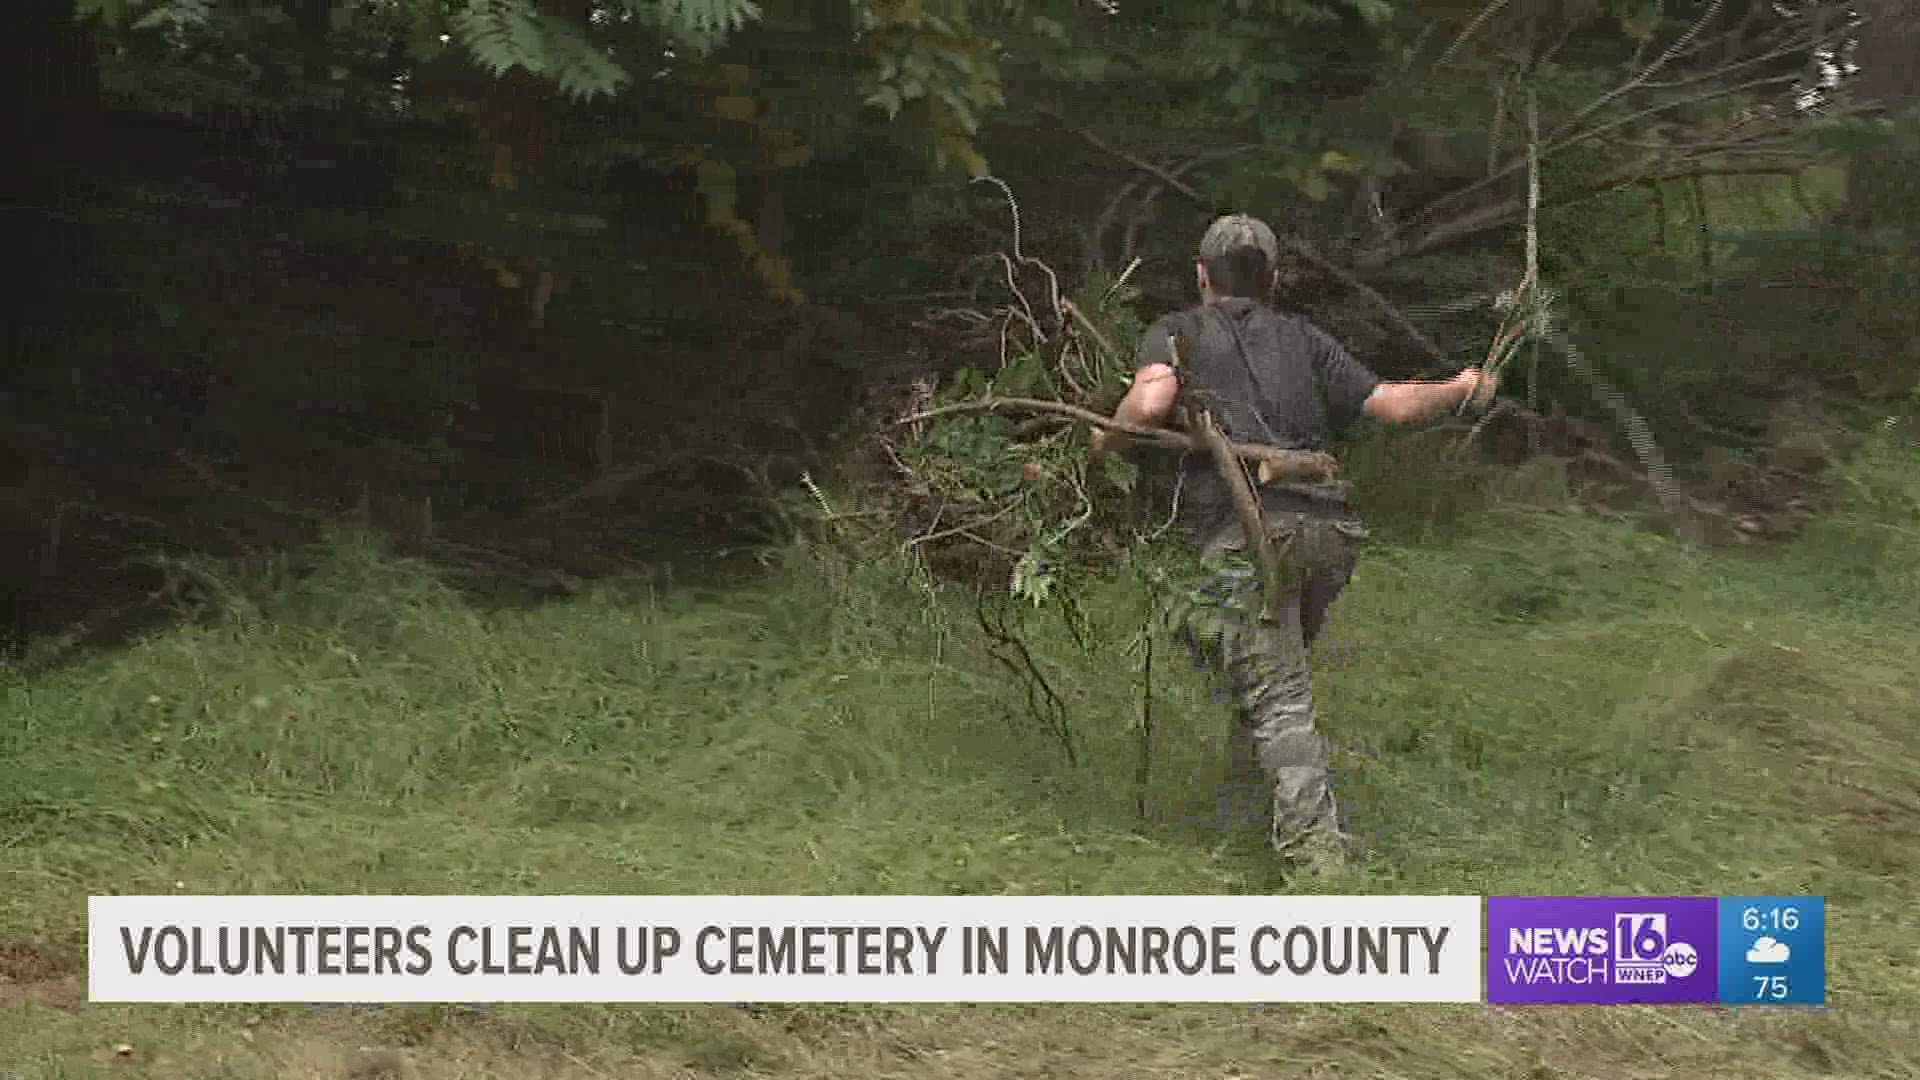 A group from Stroudsburg decided to spend their weekend cleaning up a cemetery that desperately needed it.